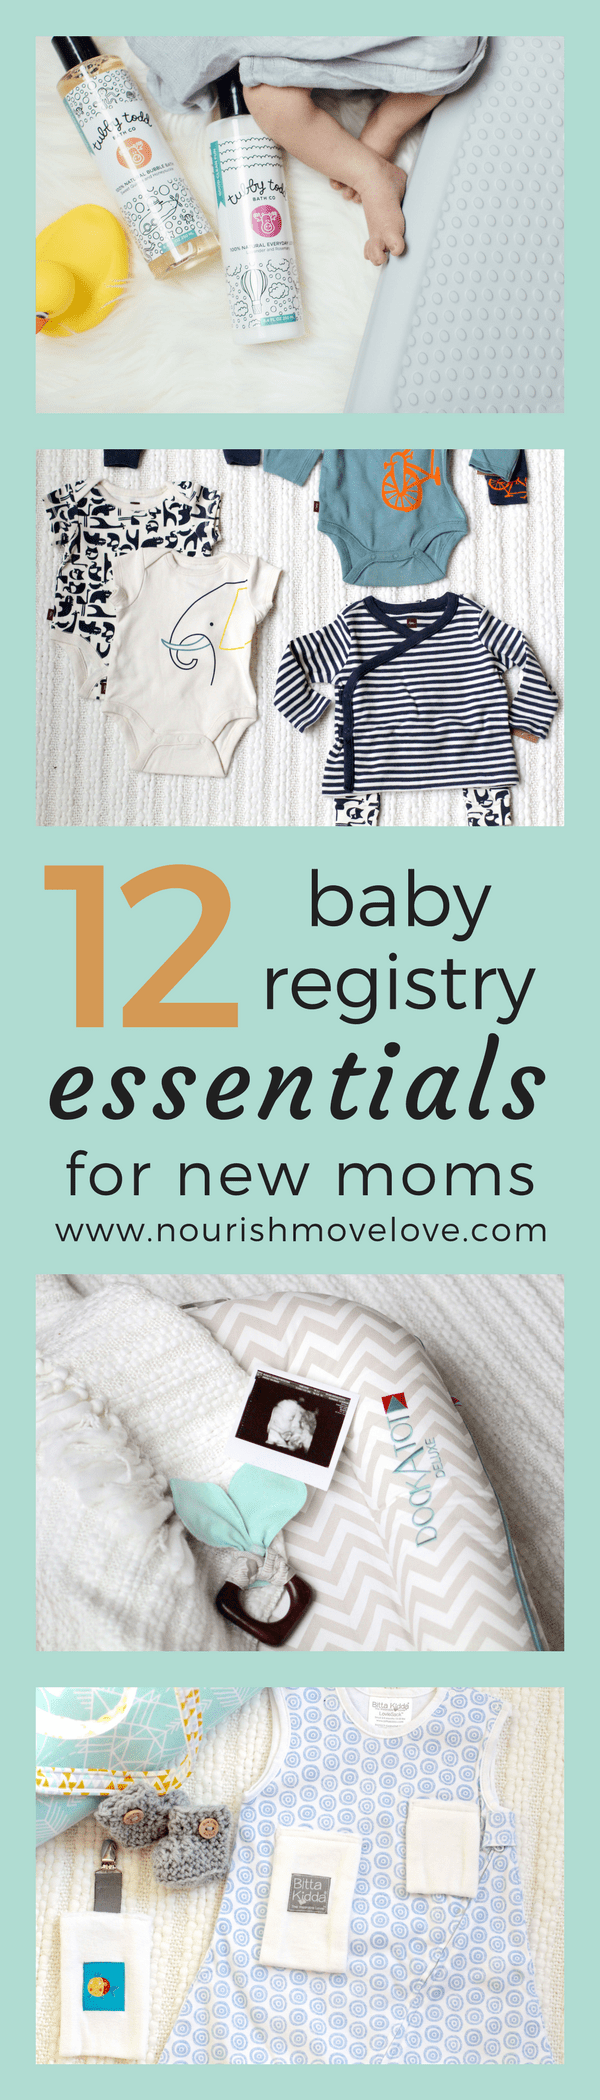 12 baby registry essentials for new moms | new baby